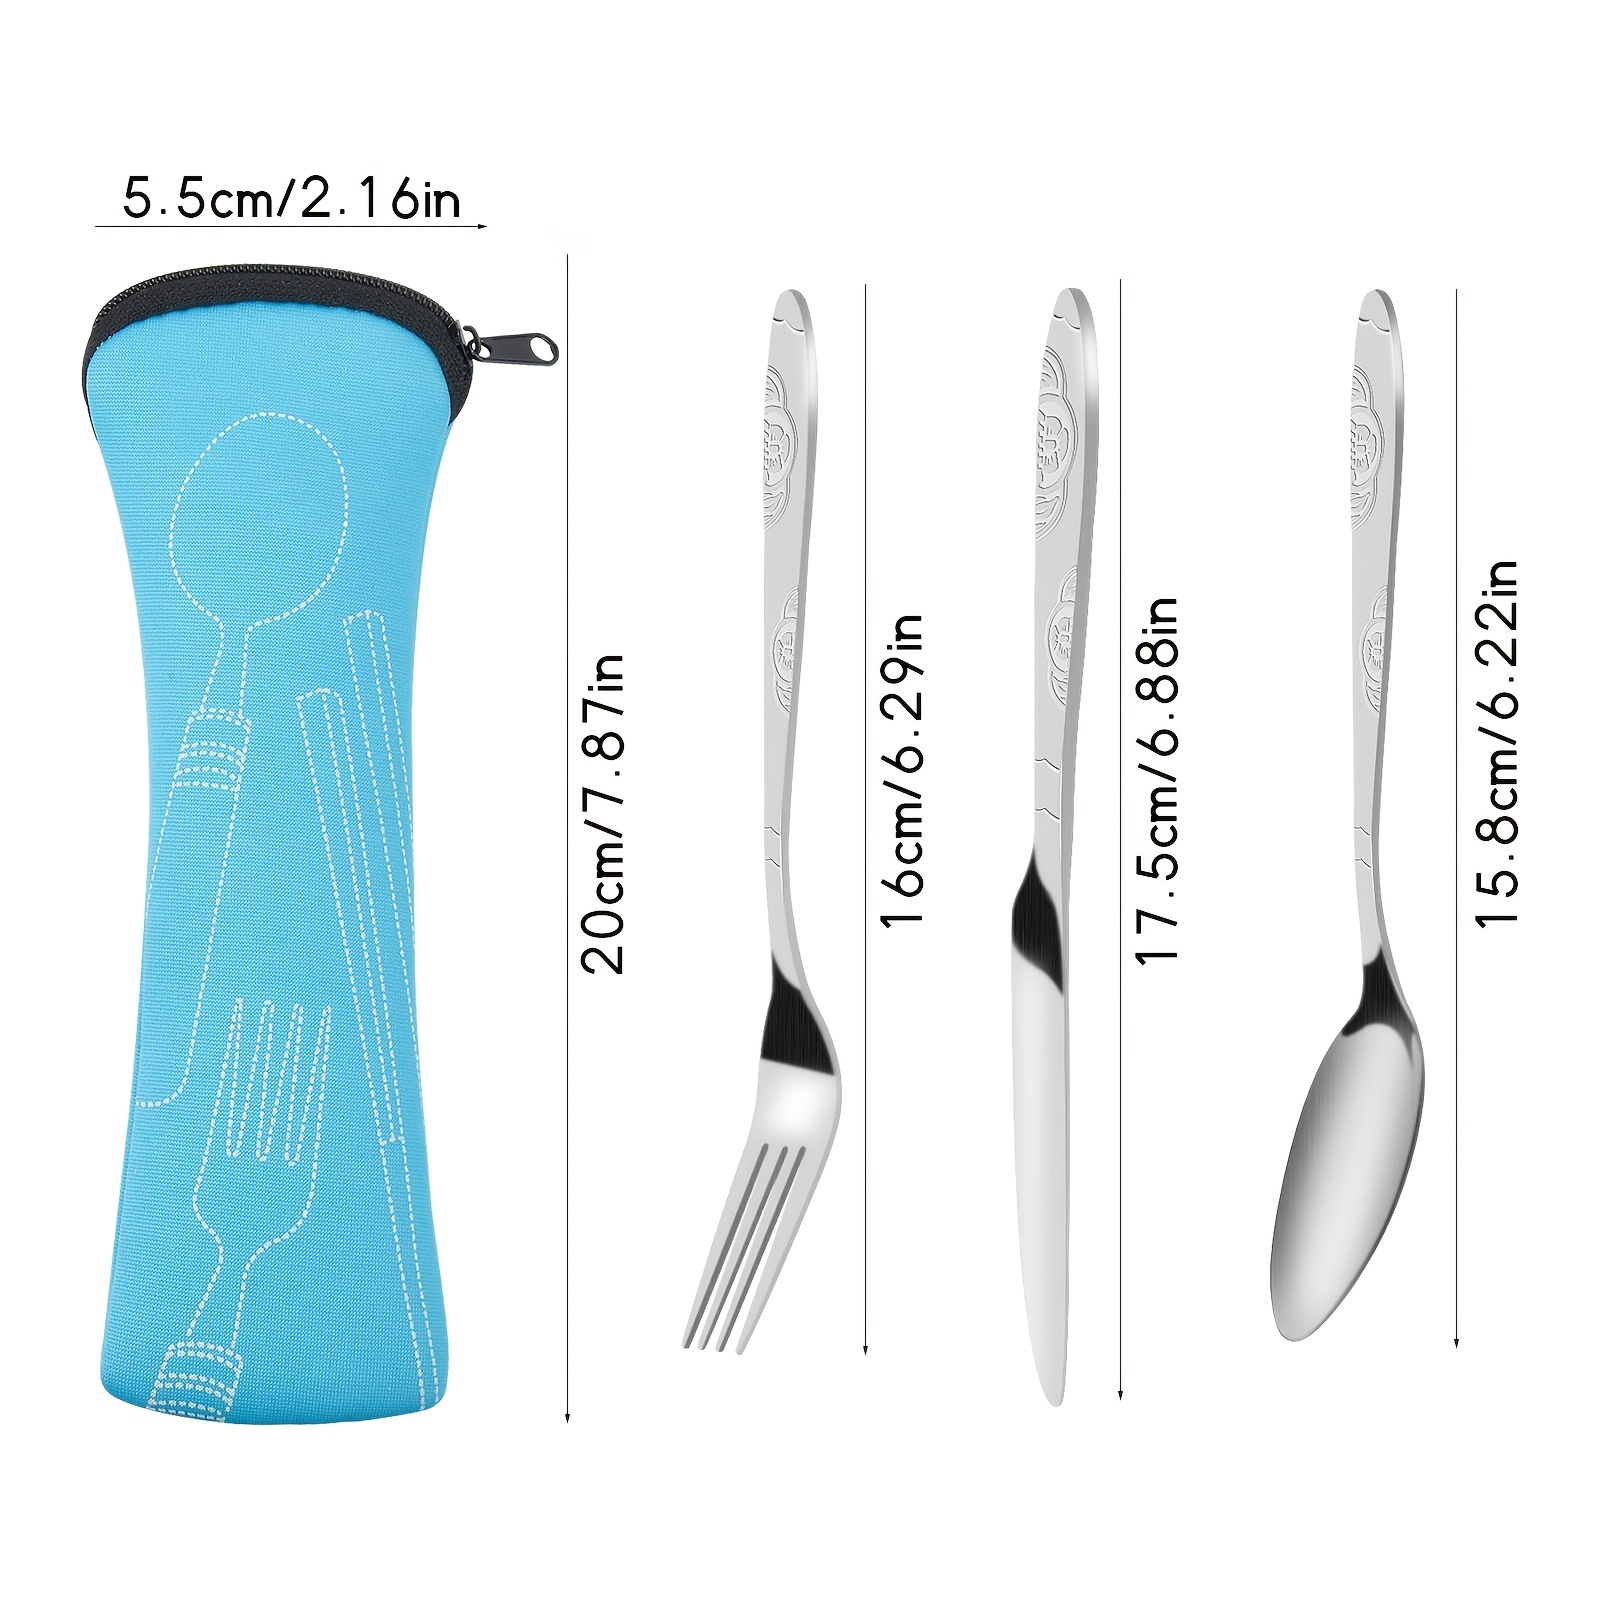 3pcs/set Stainless Steel Cutlery Set (knife, Fork, Spoon) With Travel Case,  For Camping, Picnic, Work, And Hiking, Blue